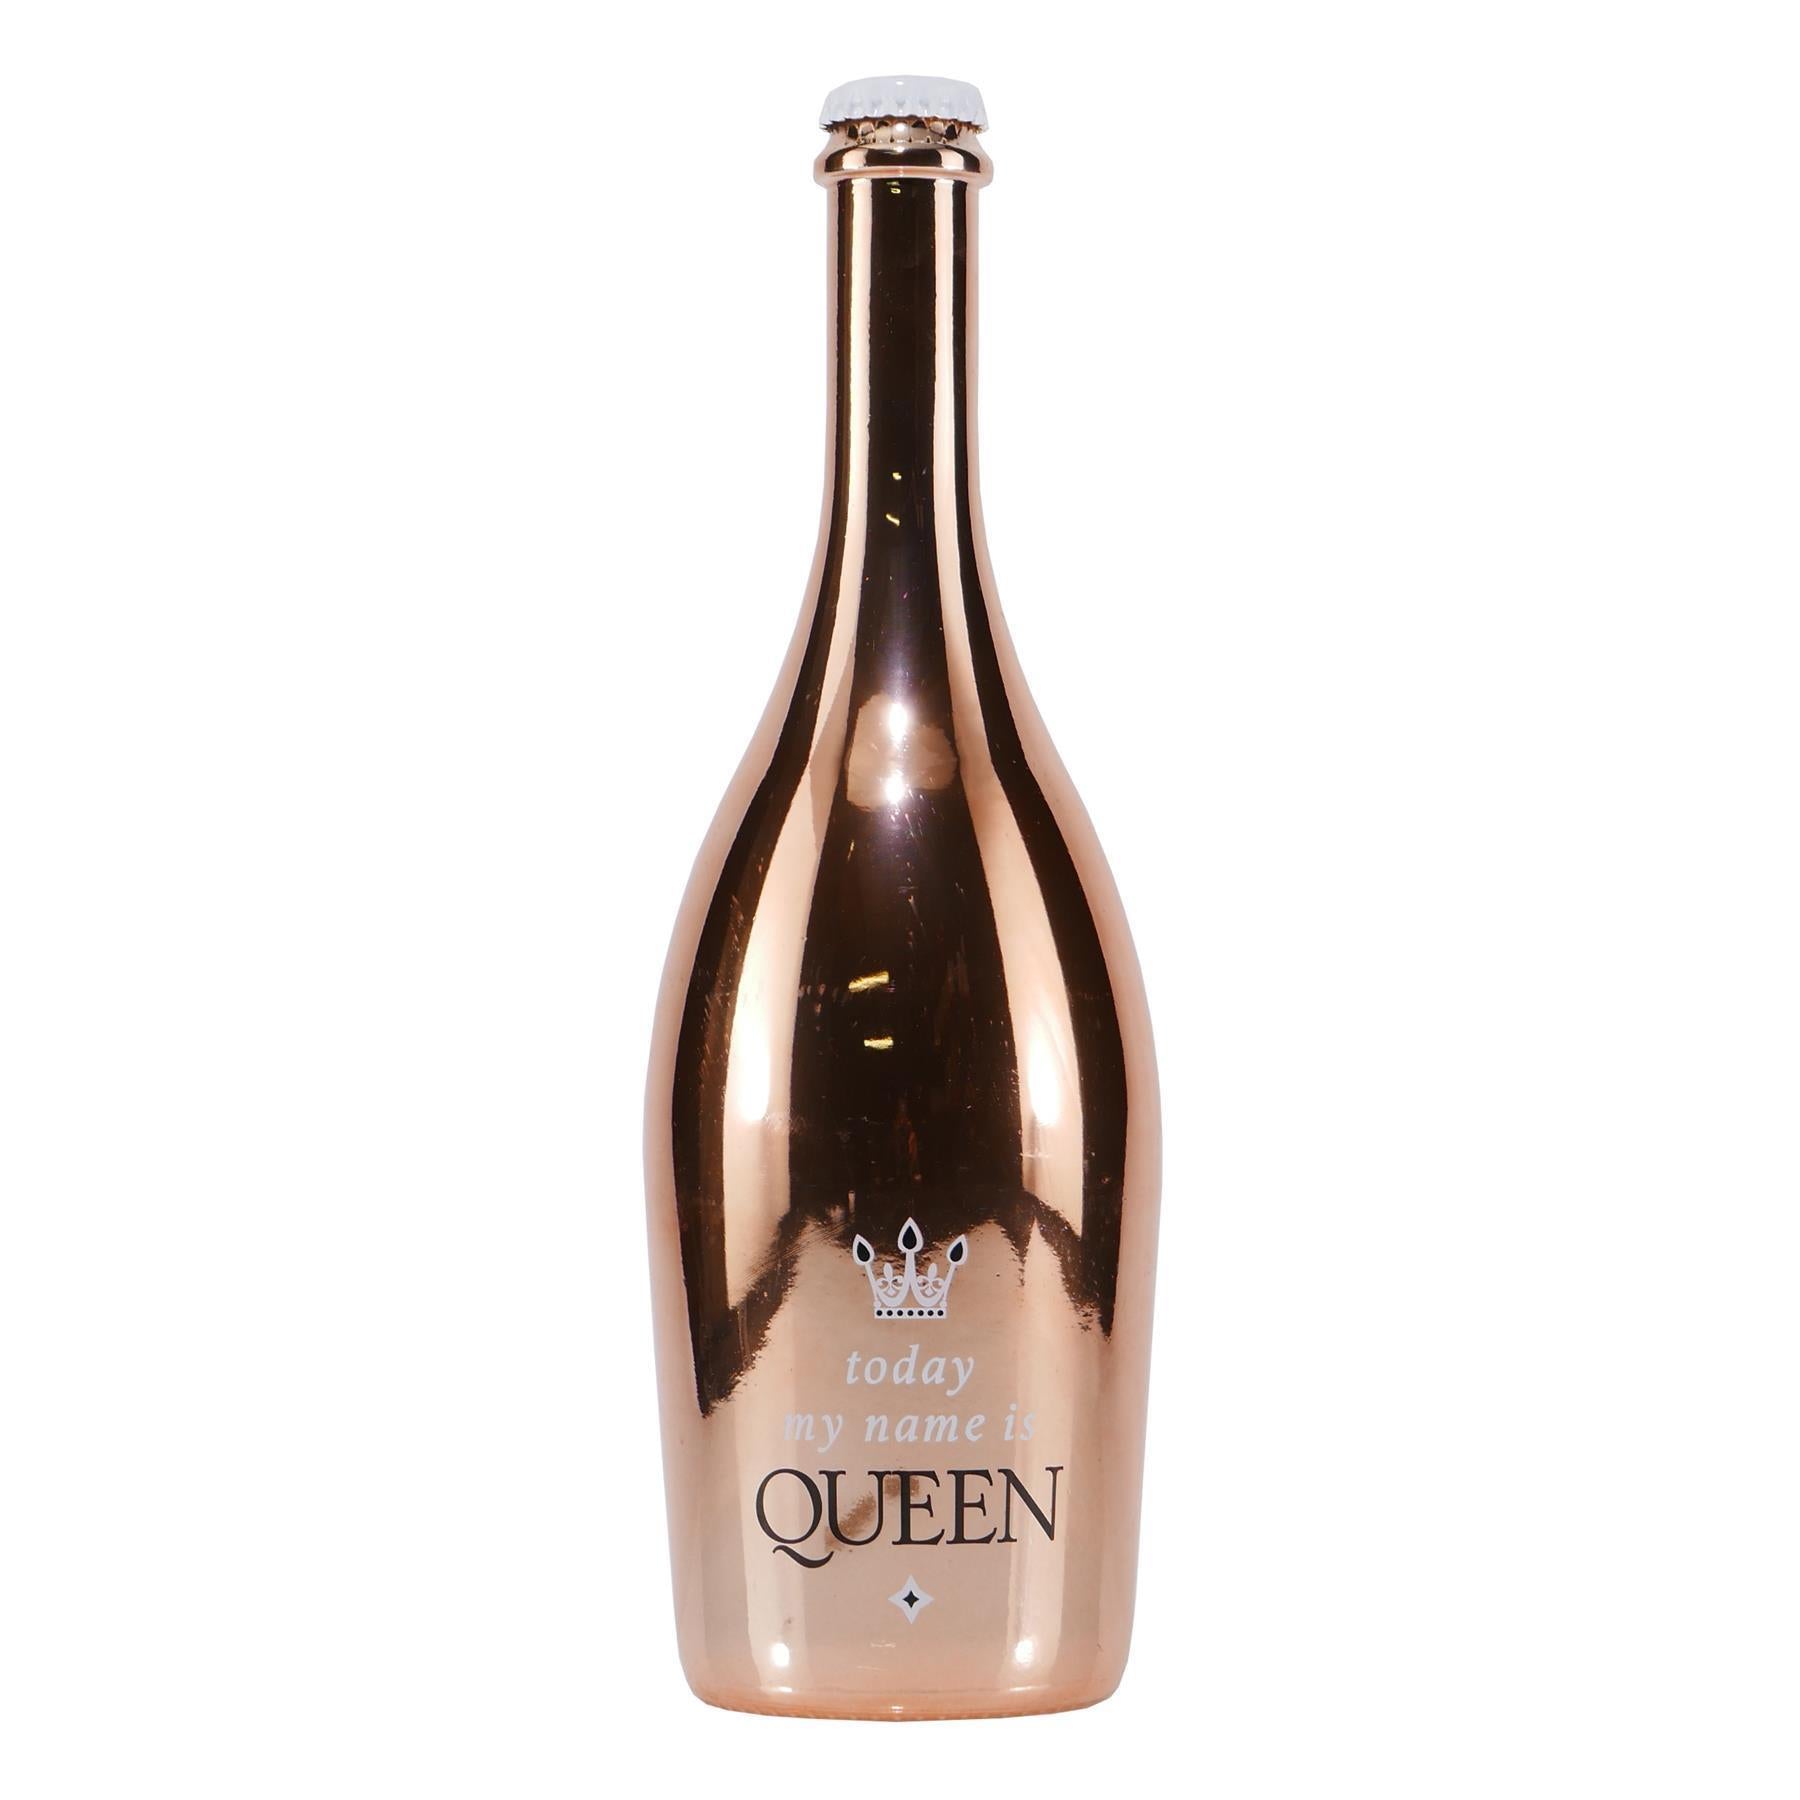 today my name is Queen (0,75L) - Perlwein rot